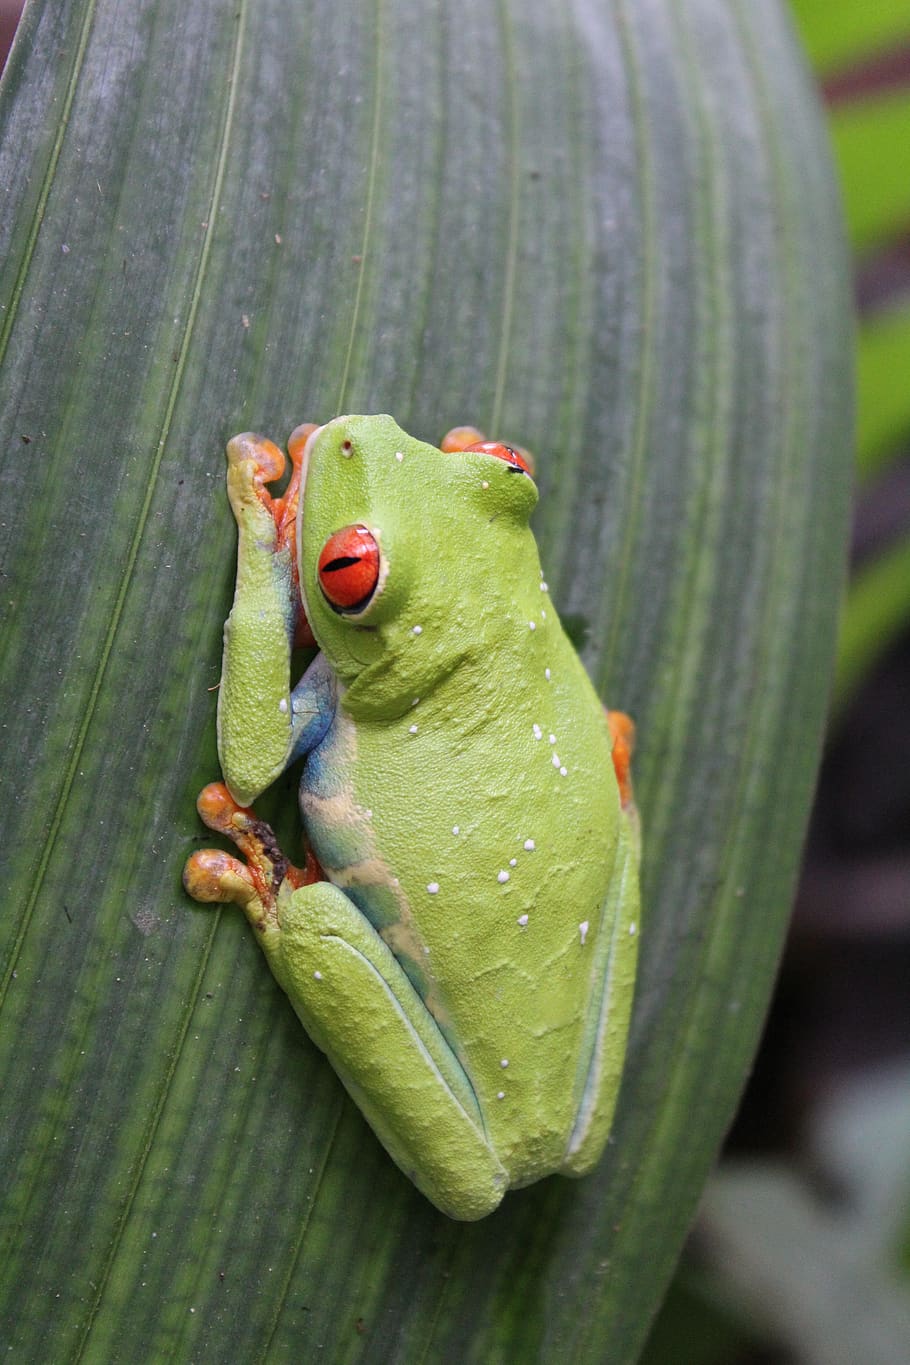 frog, nature, amphibian, tropical, rainforest, wildlife, animal, costa rica, green color, close-up